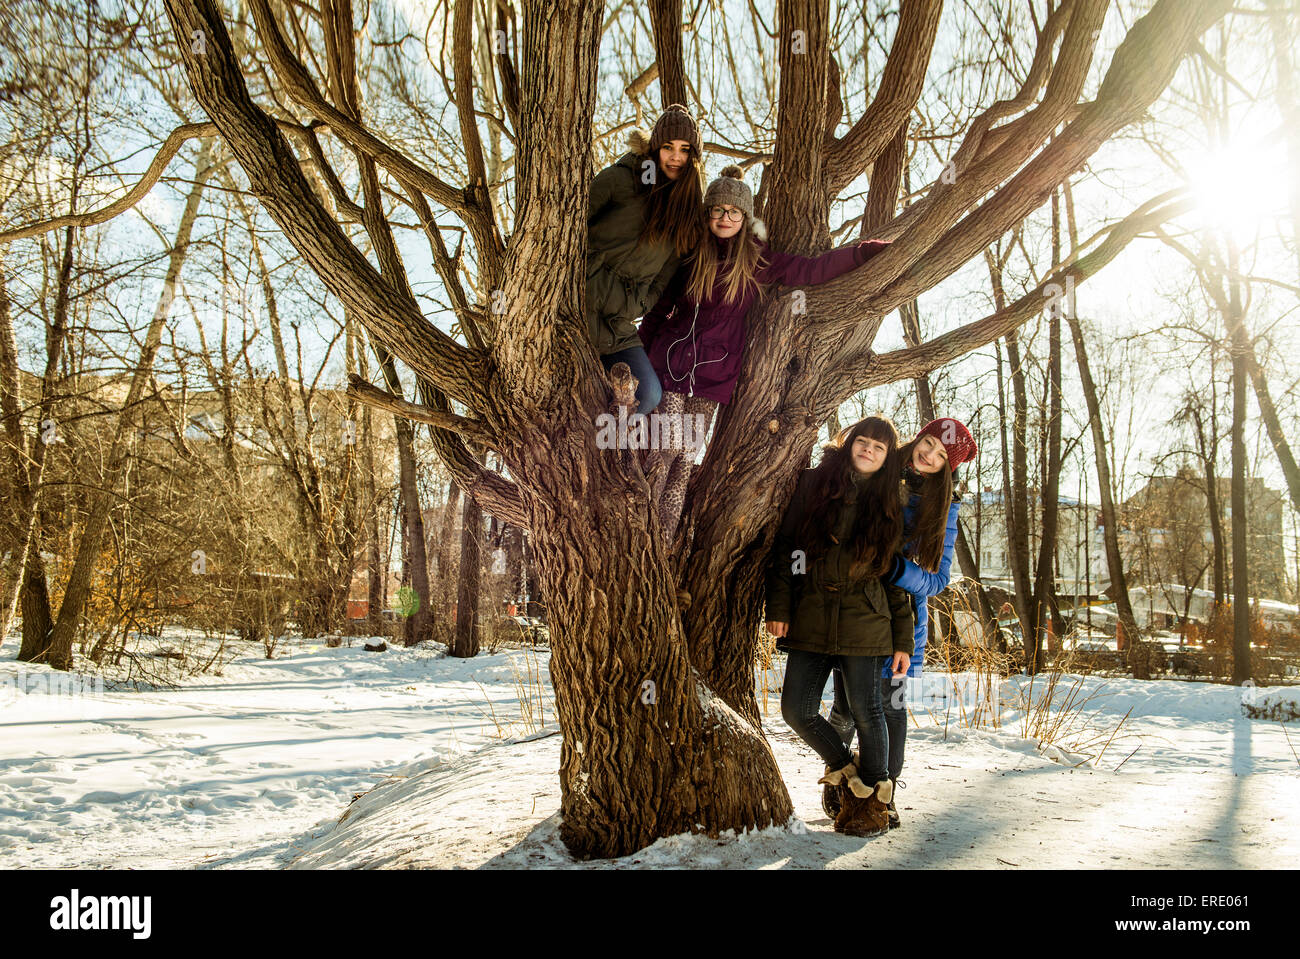 Caucasian girls smiling at tree in snowy field Banque D'Images